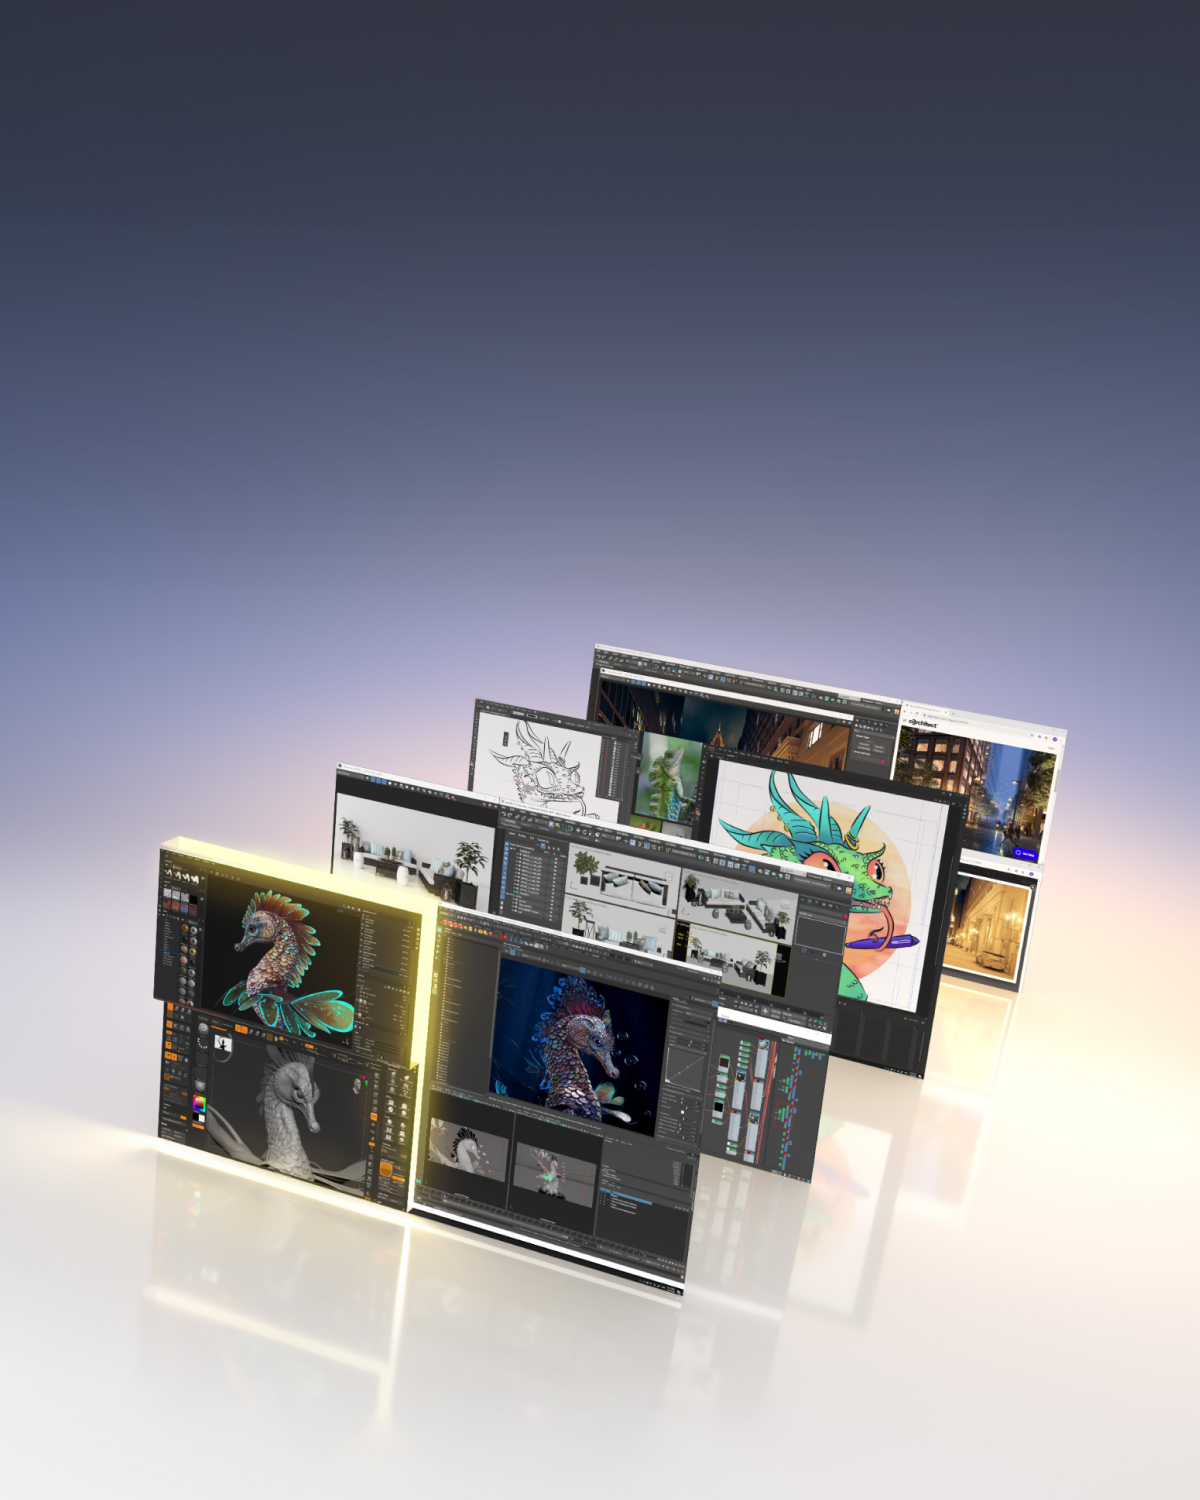 Computer screen displaying multiple images, showcasing the power of RTX 2000